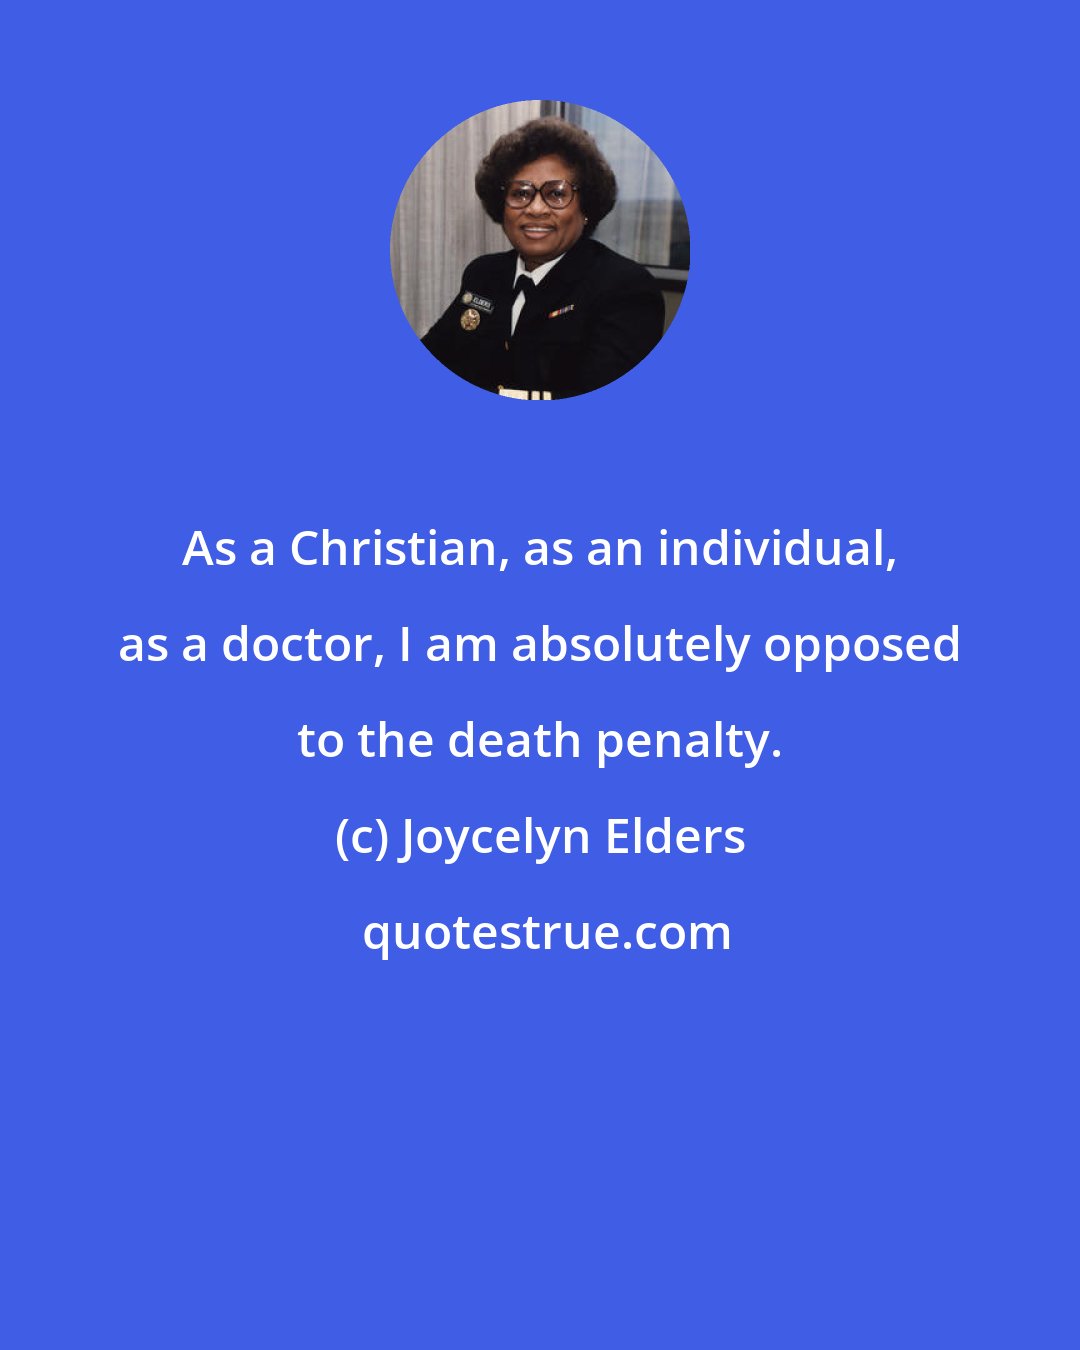 Joycelyn Elders: As a Christian, as an individual, as a doctor, I am absolutely opposed to the death penalty.